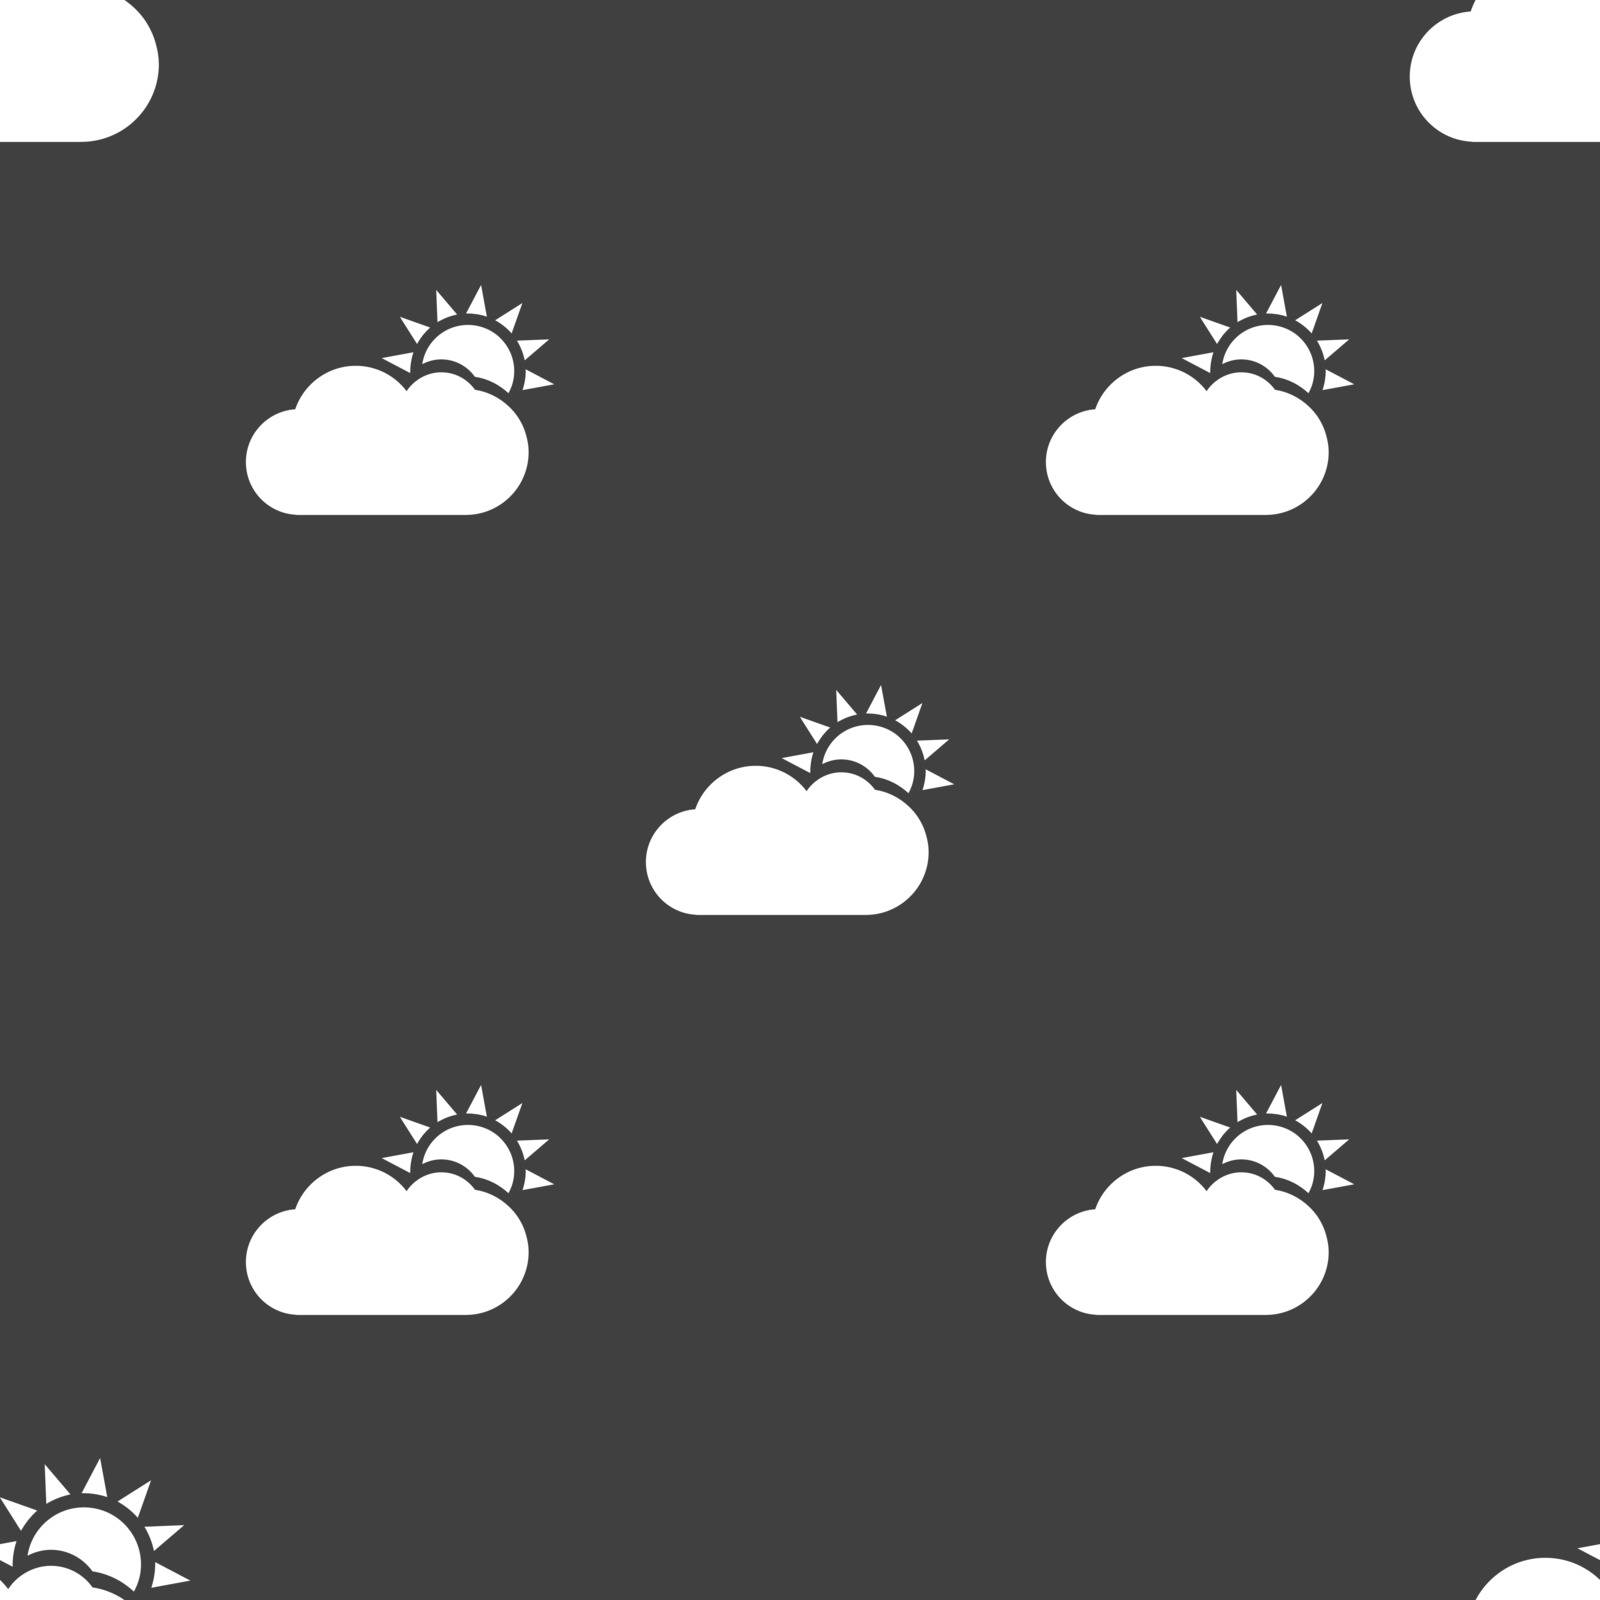 Partly Cloudy icon sign. Seamless pattern on a gray background. Vector illustration